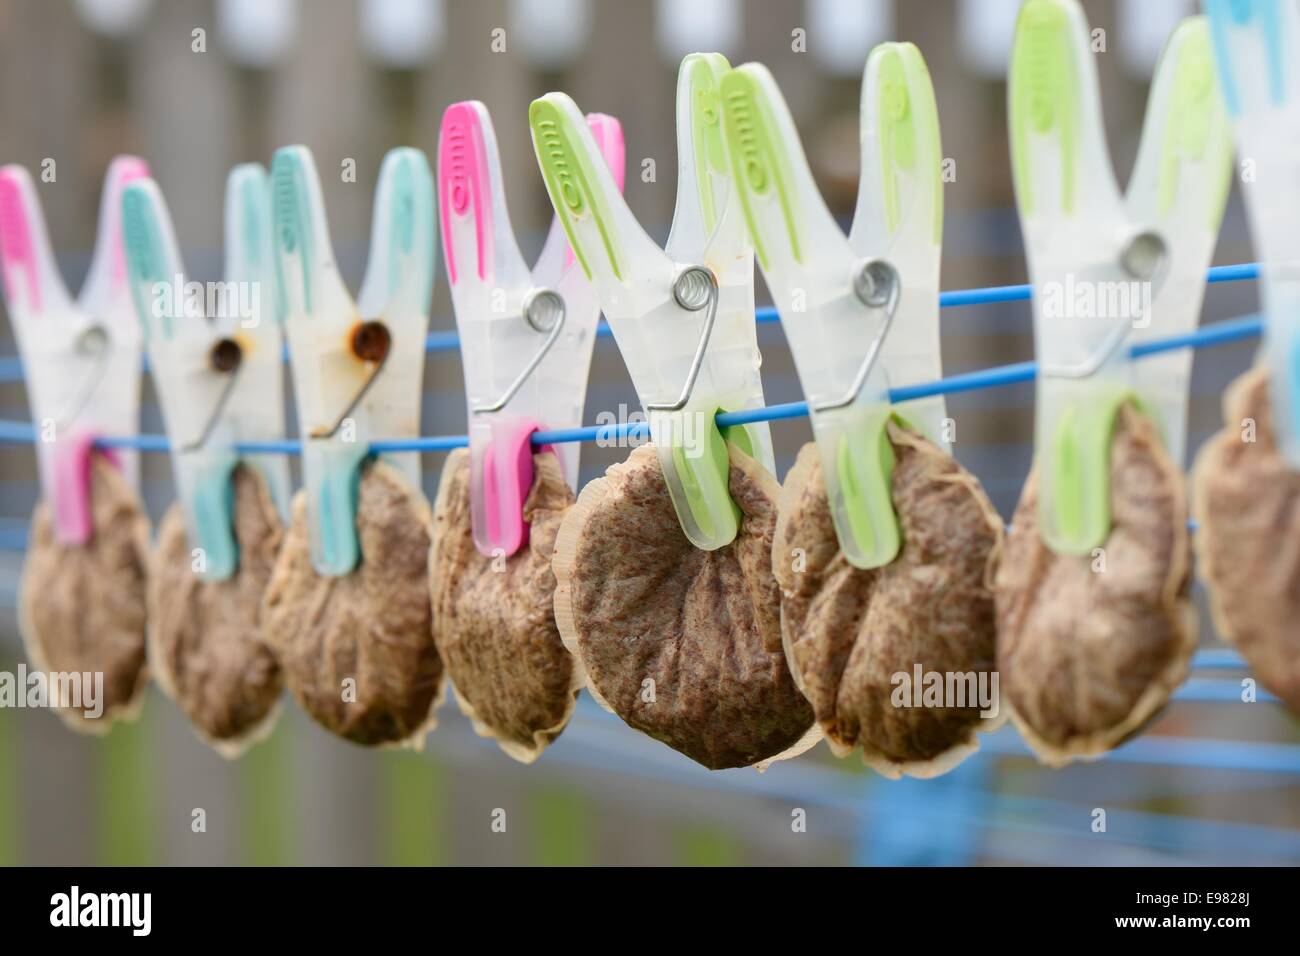 Concept image. A row of used tea bags hanging to dry on a line indicating austerity or poverty Stock Photo - Alamy